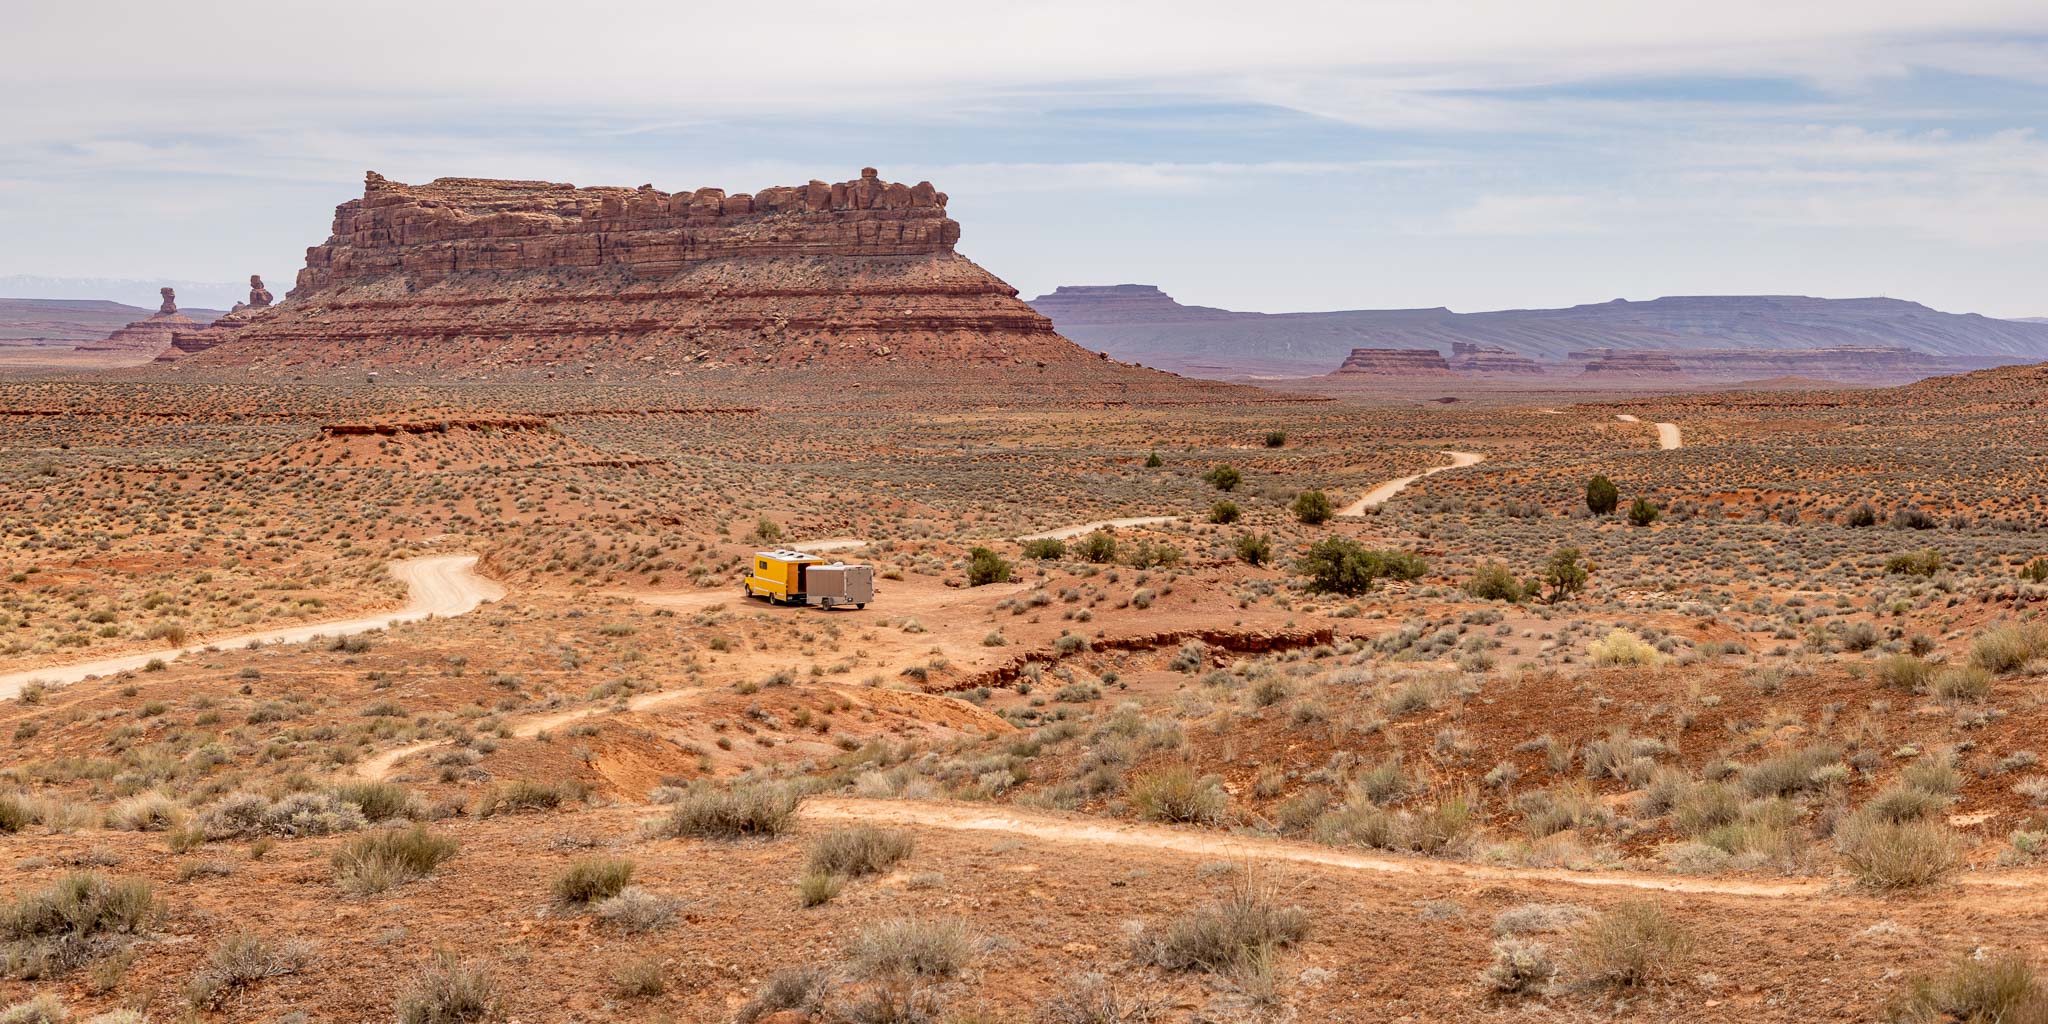 Camped at Valley of the Gods, Mexican Hat UT, April 14, 2022